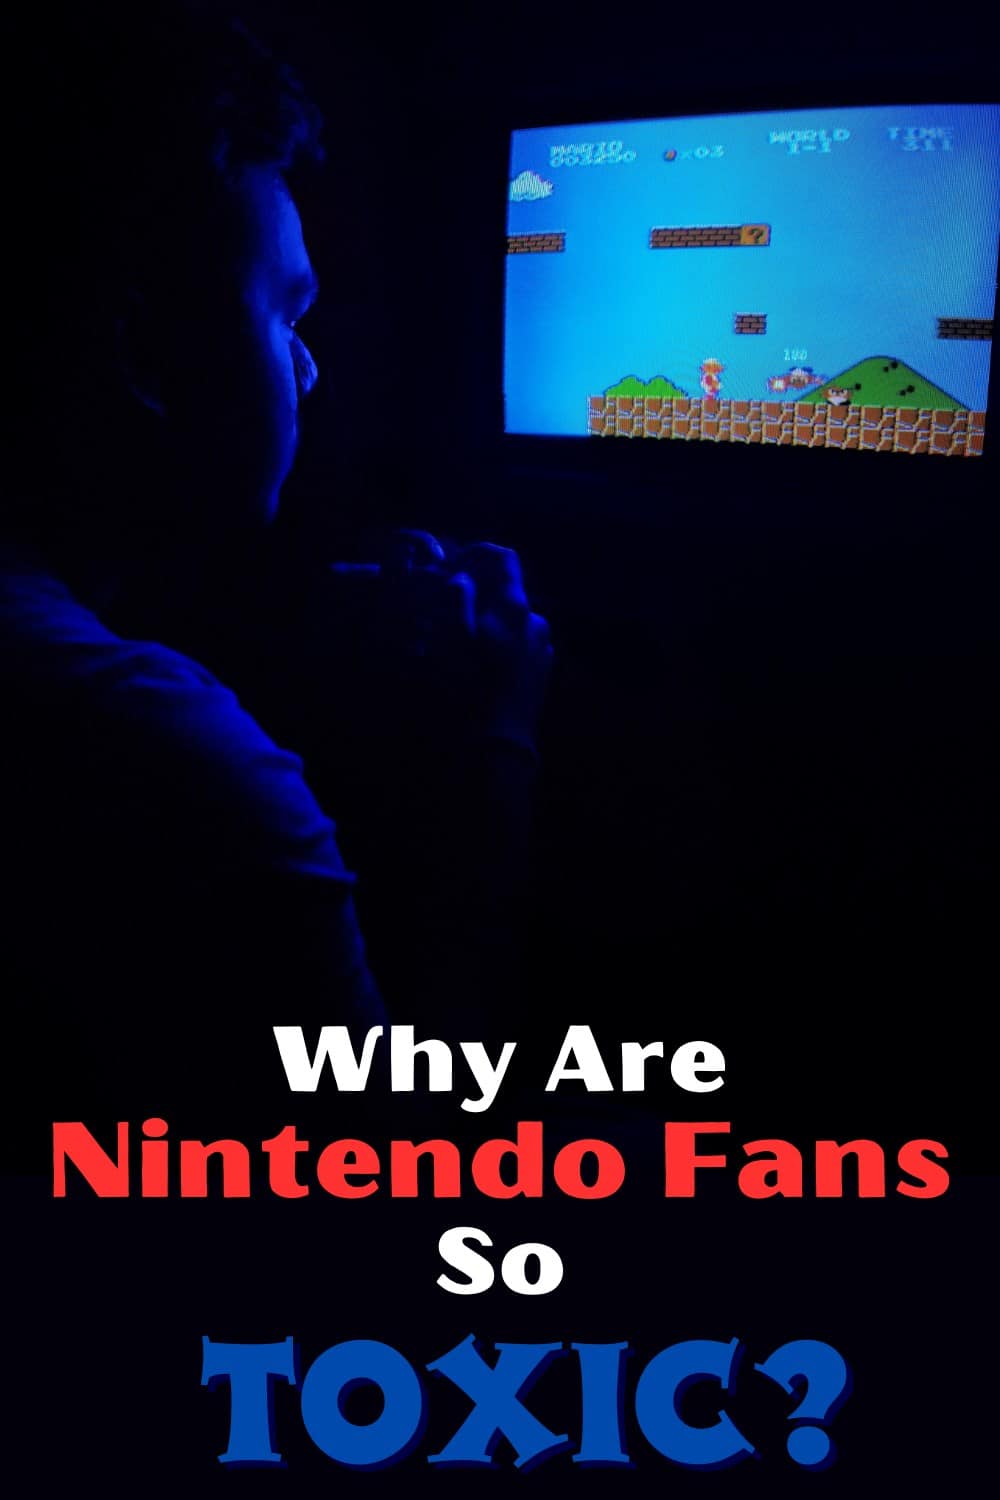 Nintendo fan boys are toxic because people hate change